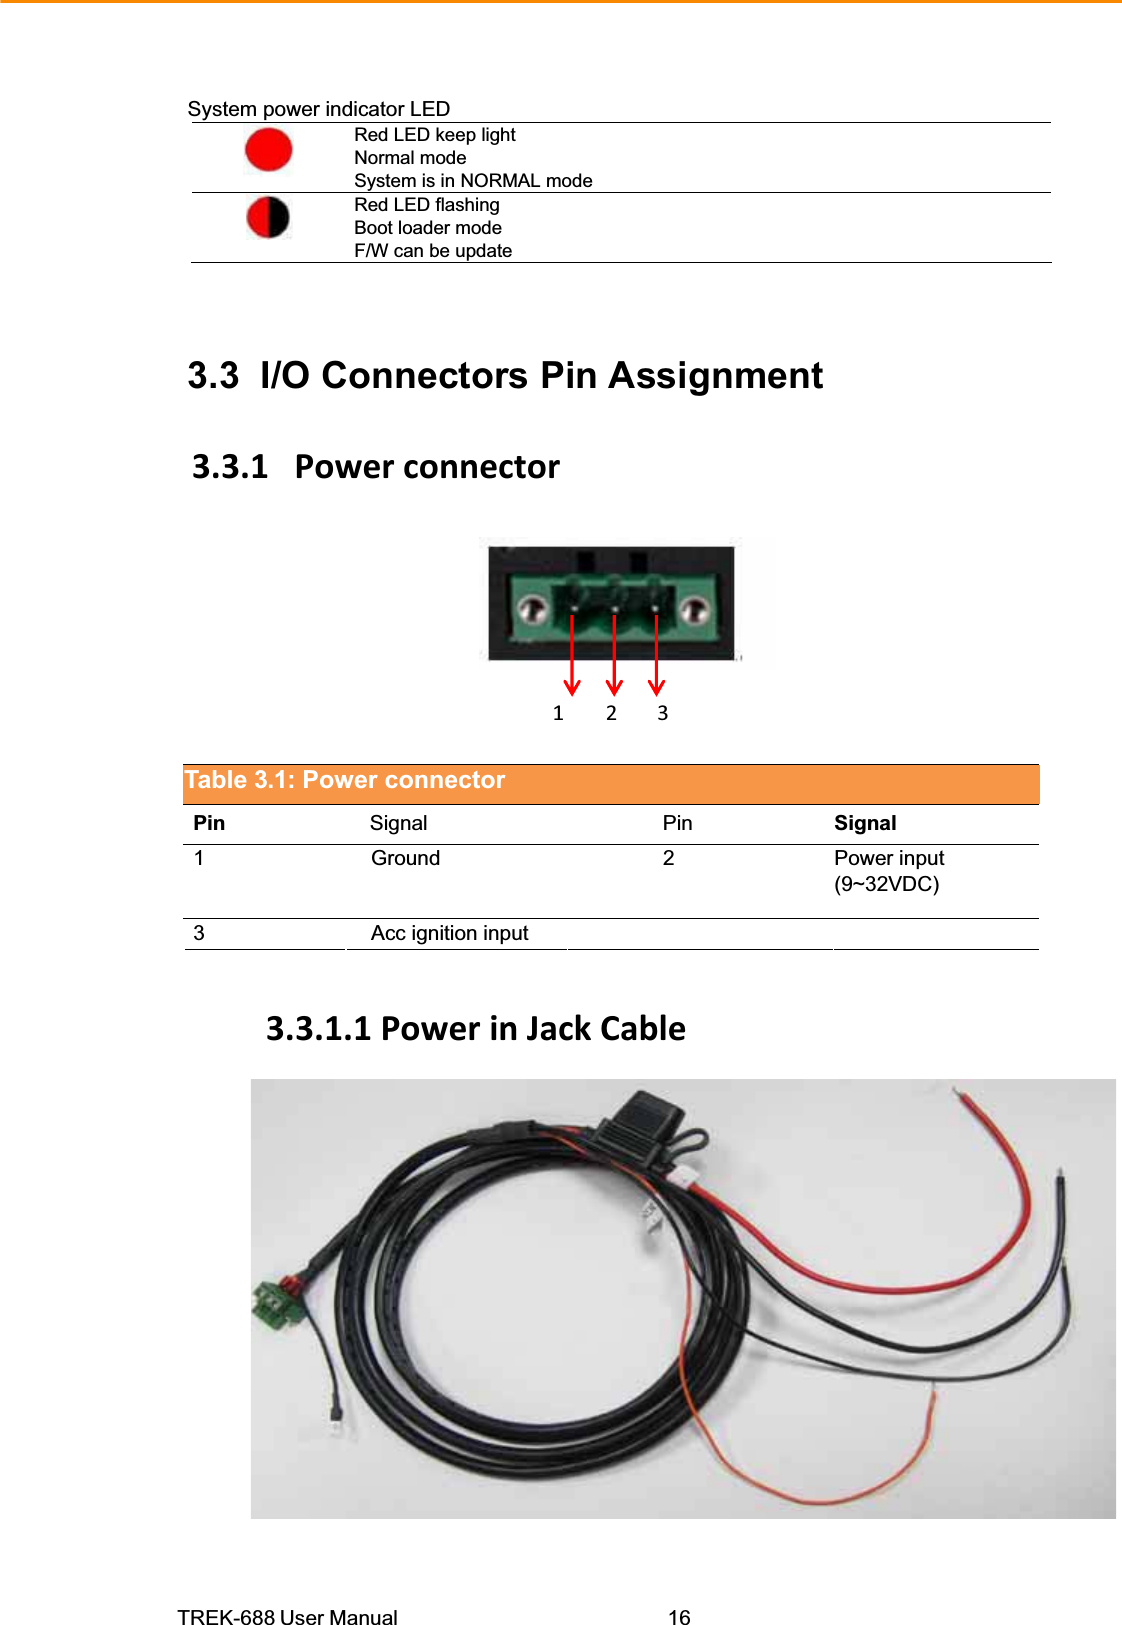 TREK-688 User Manual  16System power indicator LED Red LED keep light Normal mode System is in NORMAL mode Red LED flashing Boot loader mode F/W can be update 3.3  I/O Connectors Pin Assignment 3.3.1PowerconnectorTable 3.1: Power connector Pin     Signal  Pin  Signal1 Ground  2 Power input (9~32VDC) 3  Acc ignition input     3.3.1.1PowerinJackCable123